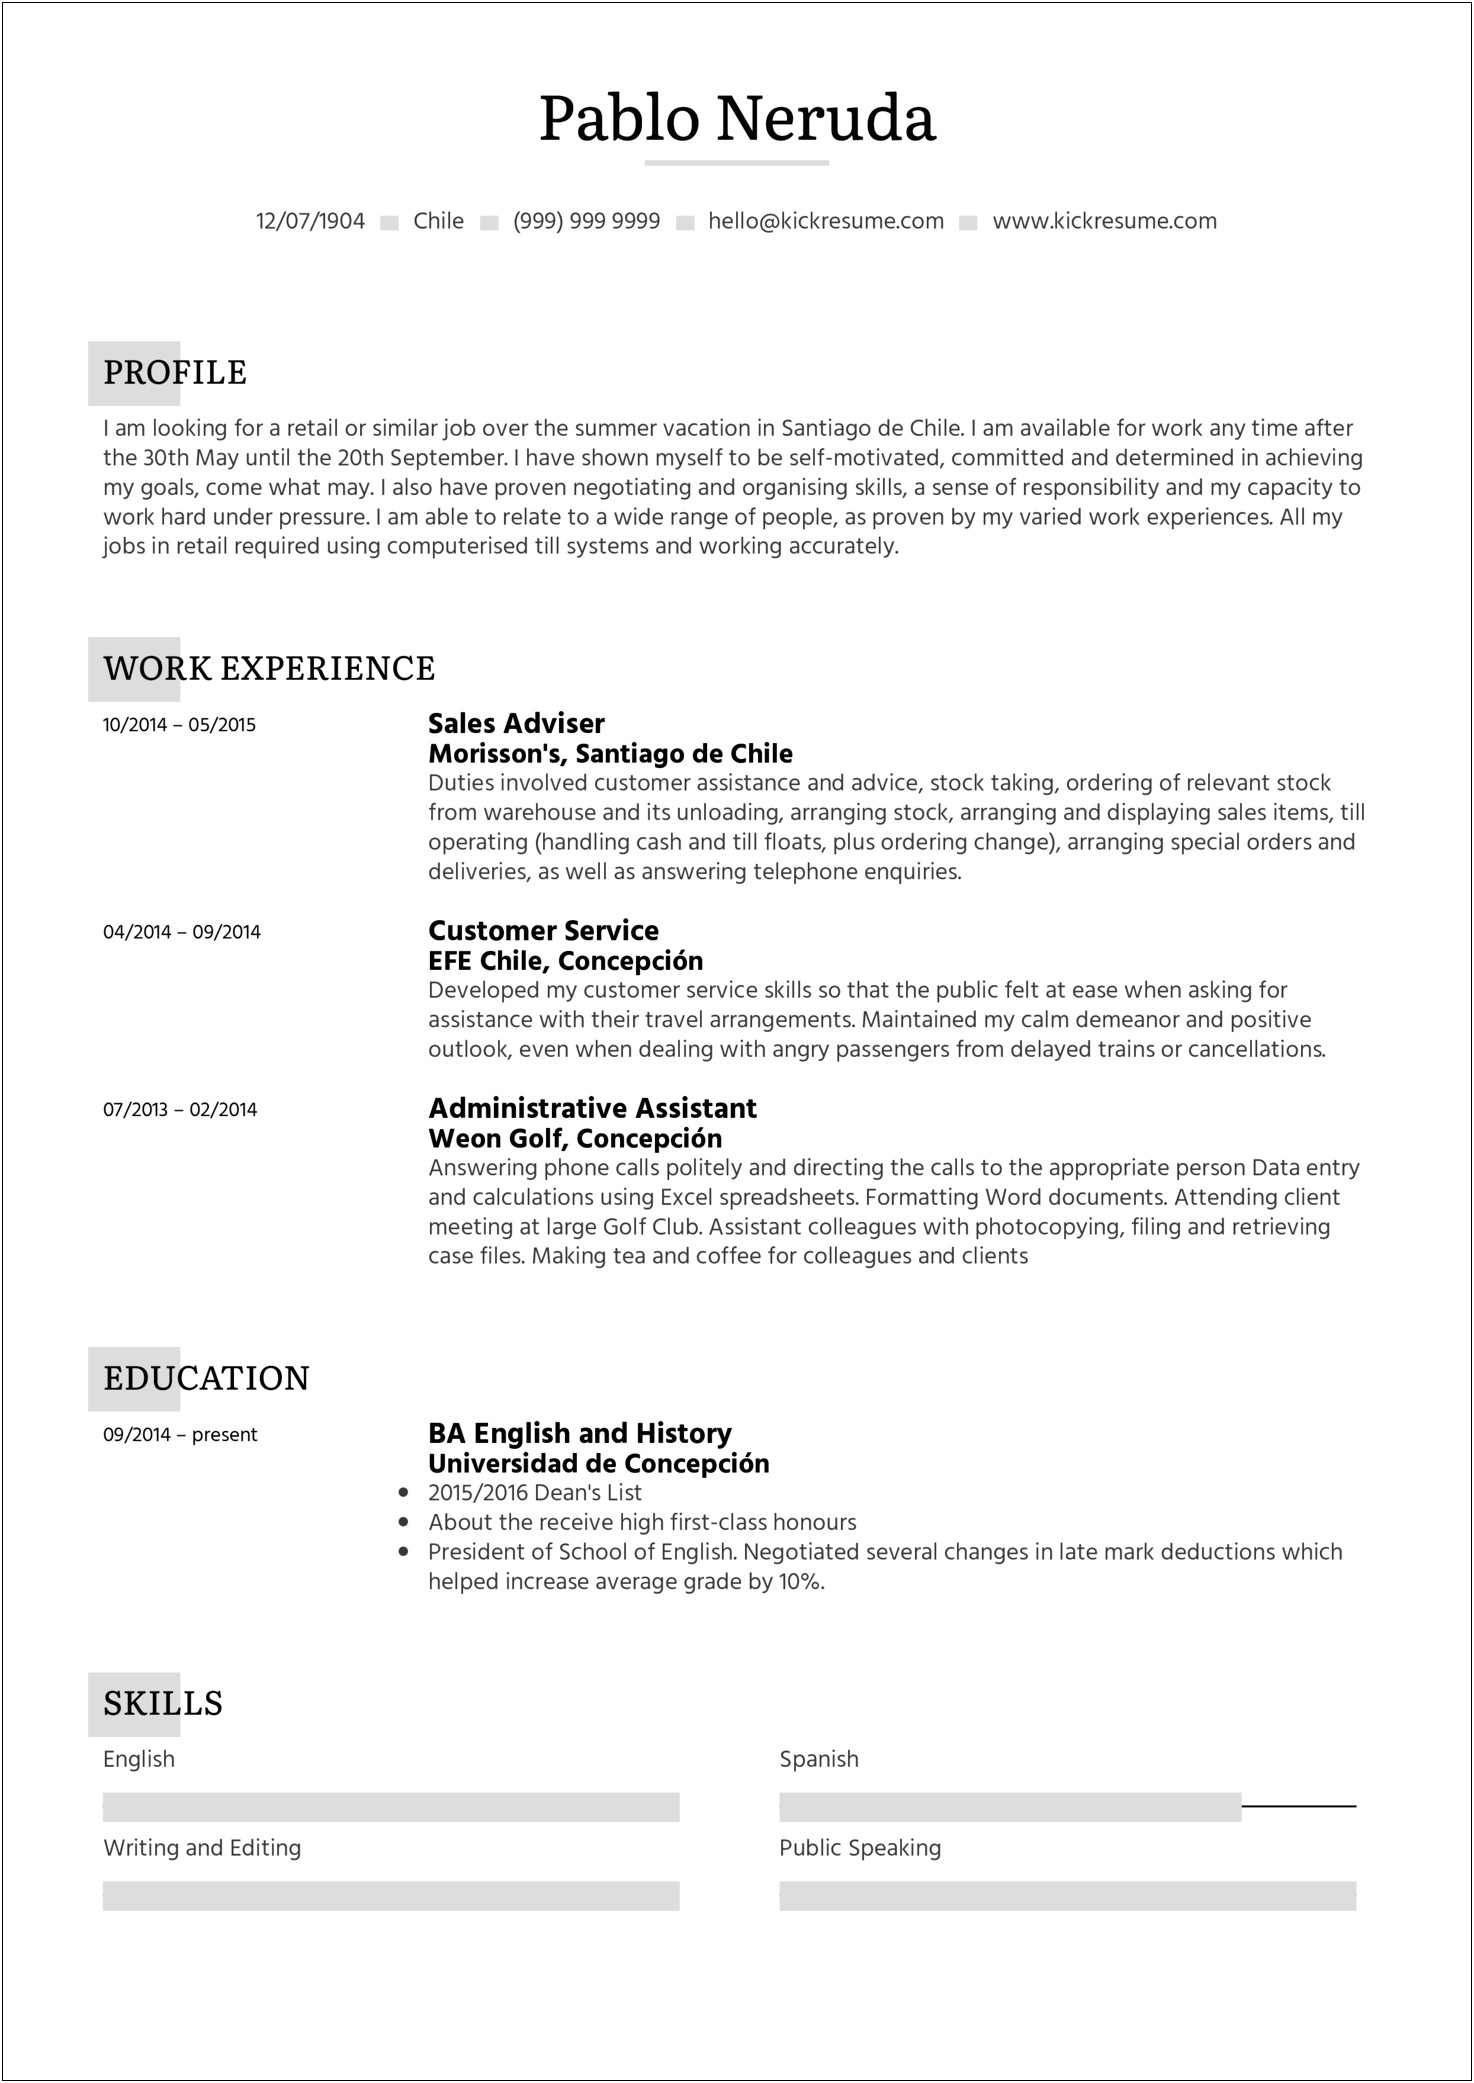 Examples Resumes For High School Students